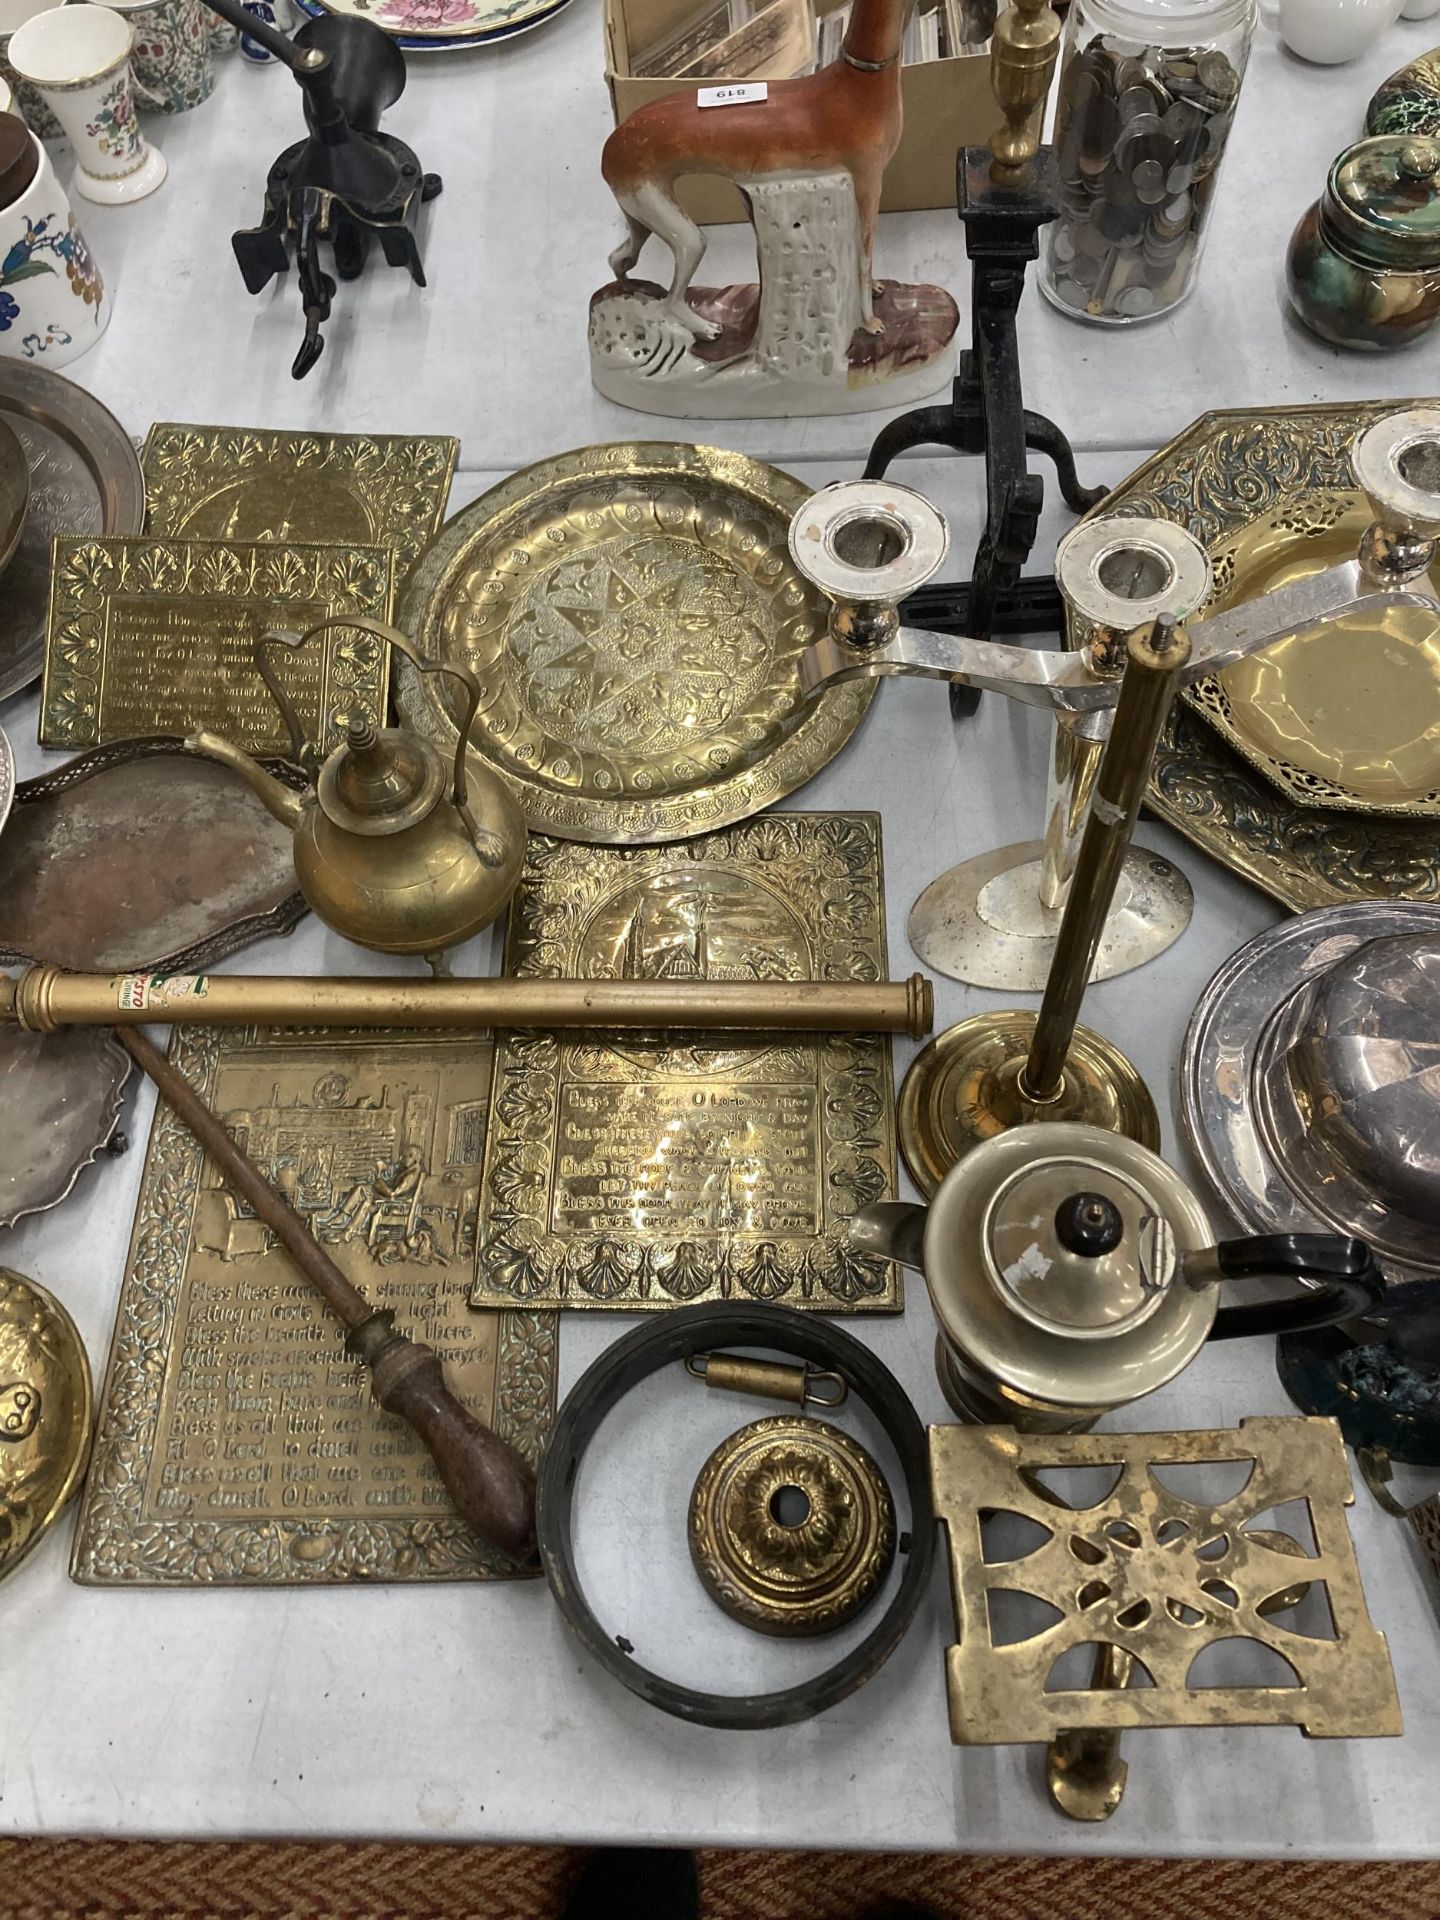 A LARGE QUANTITY OF ITEMS TO INCLUDE BRASS PLAQUES, PLATES, BOWLS, CANDLEABRA, SERVING DISHES, - Image 3 of 10